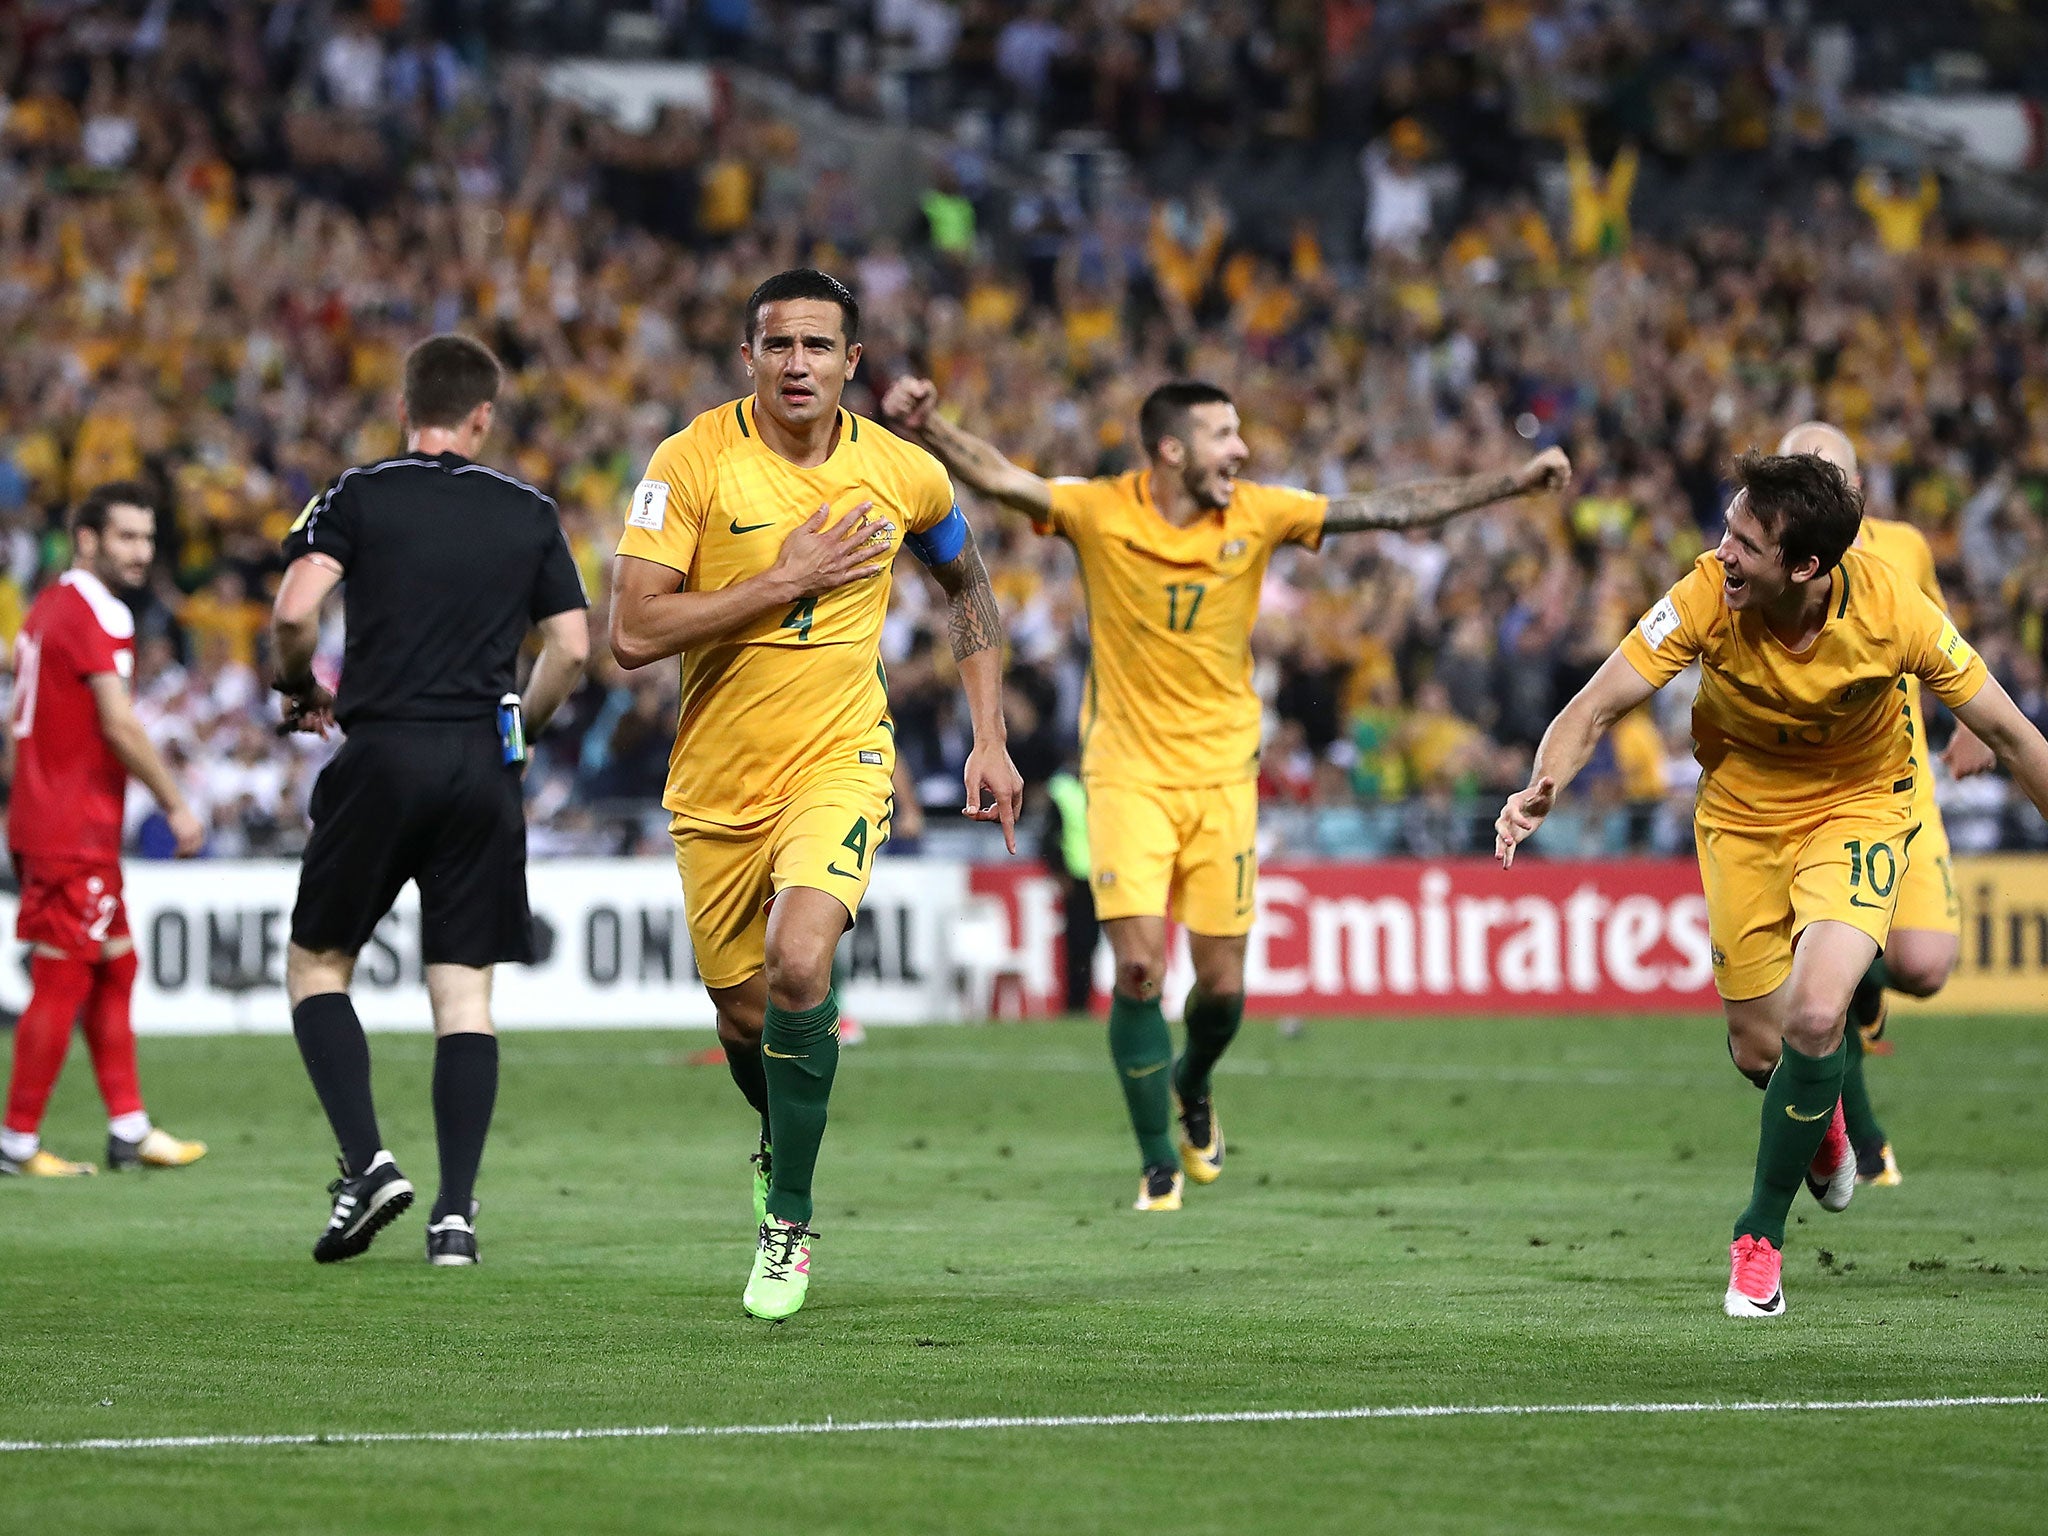 Tim Cahill celebrates securing the winning goal against Syria